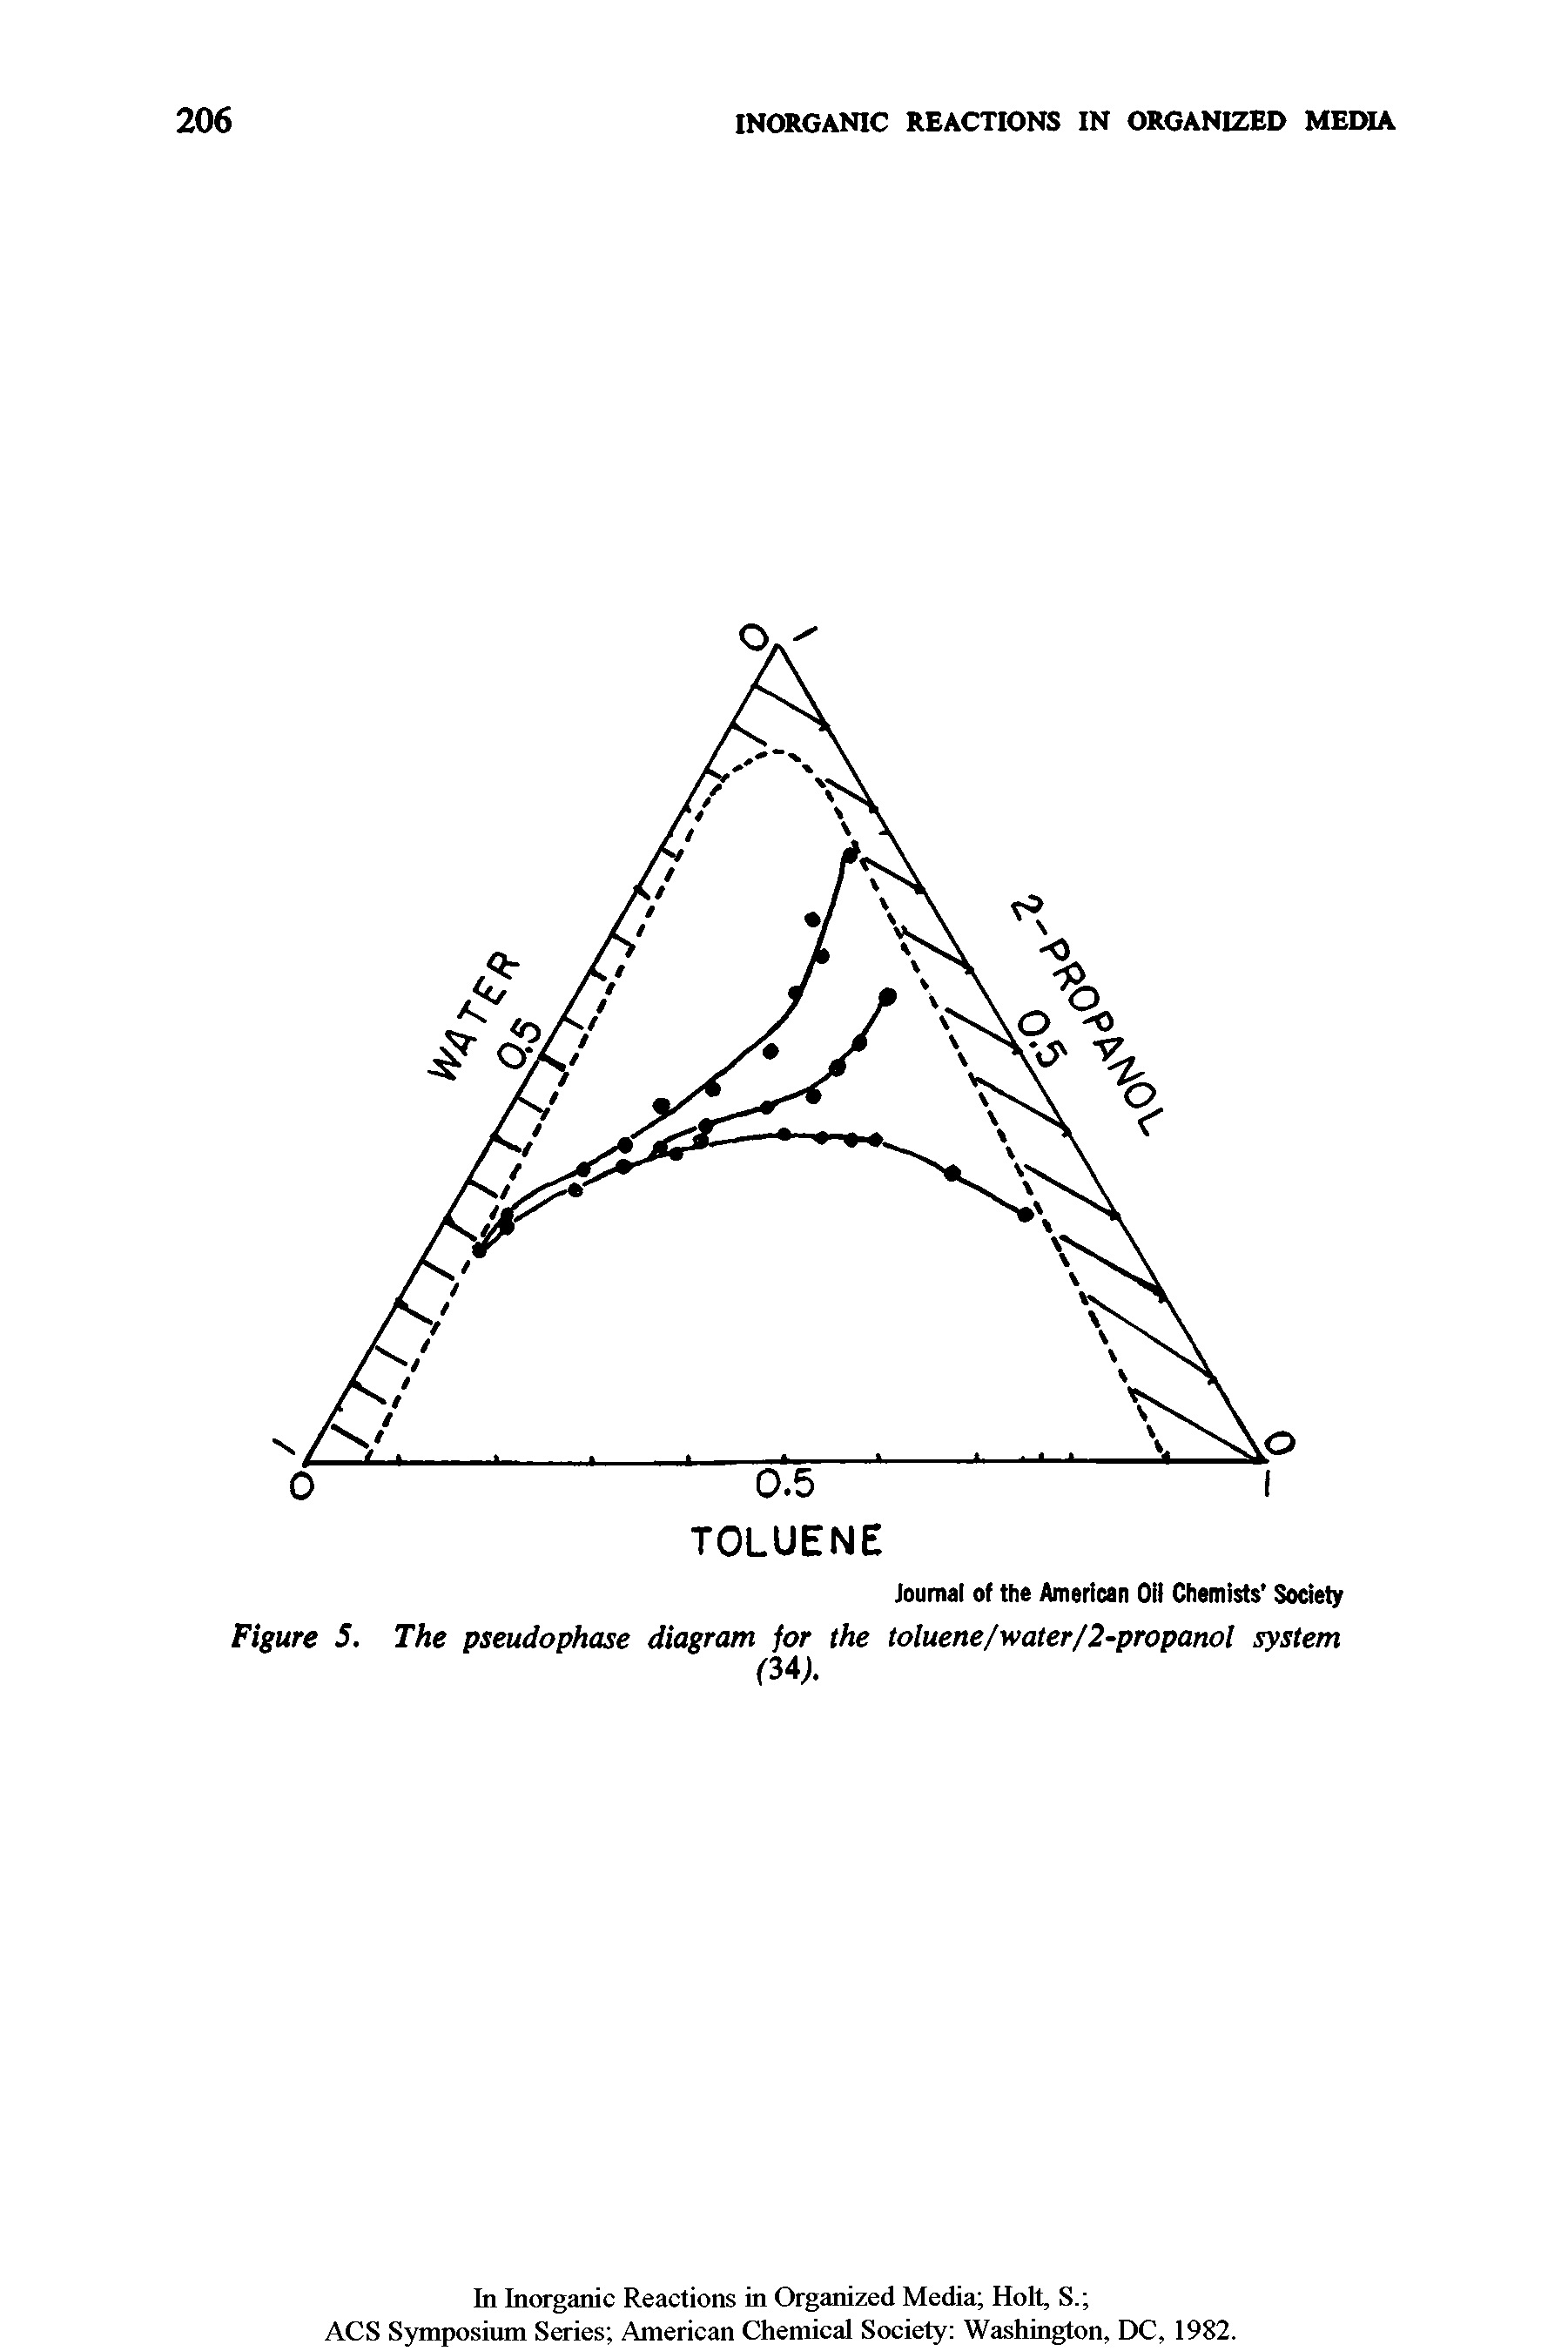 Figure 5. The pseudophase diagram for the toiuene/water/2-propanoi system...